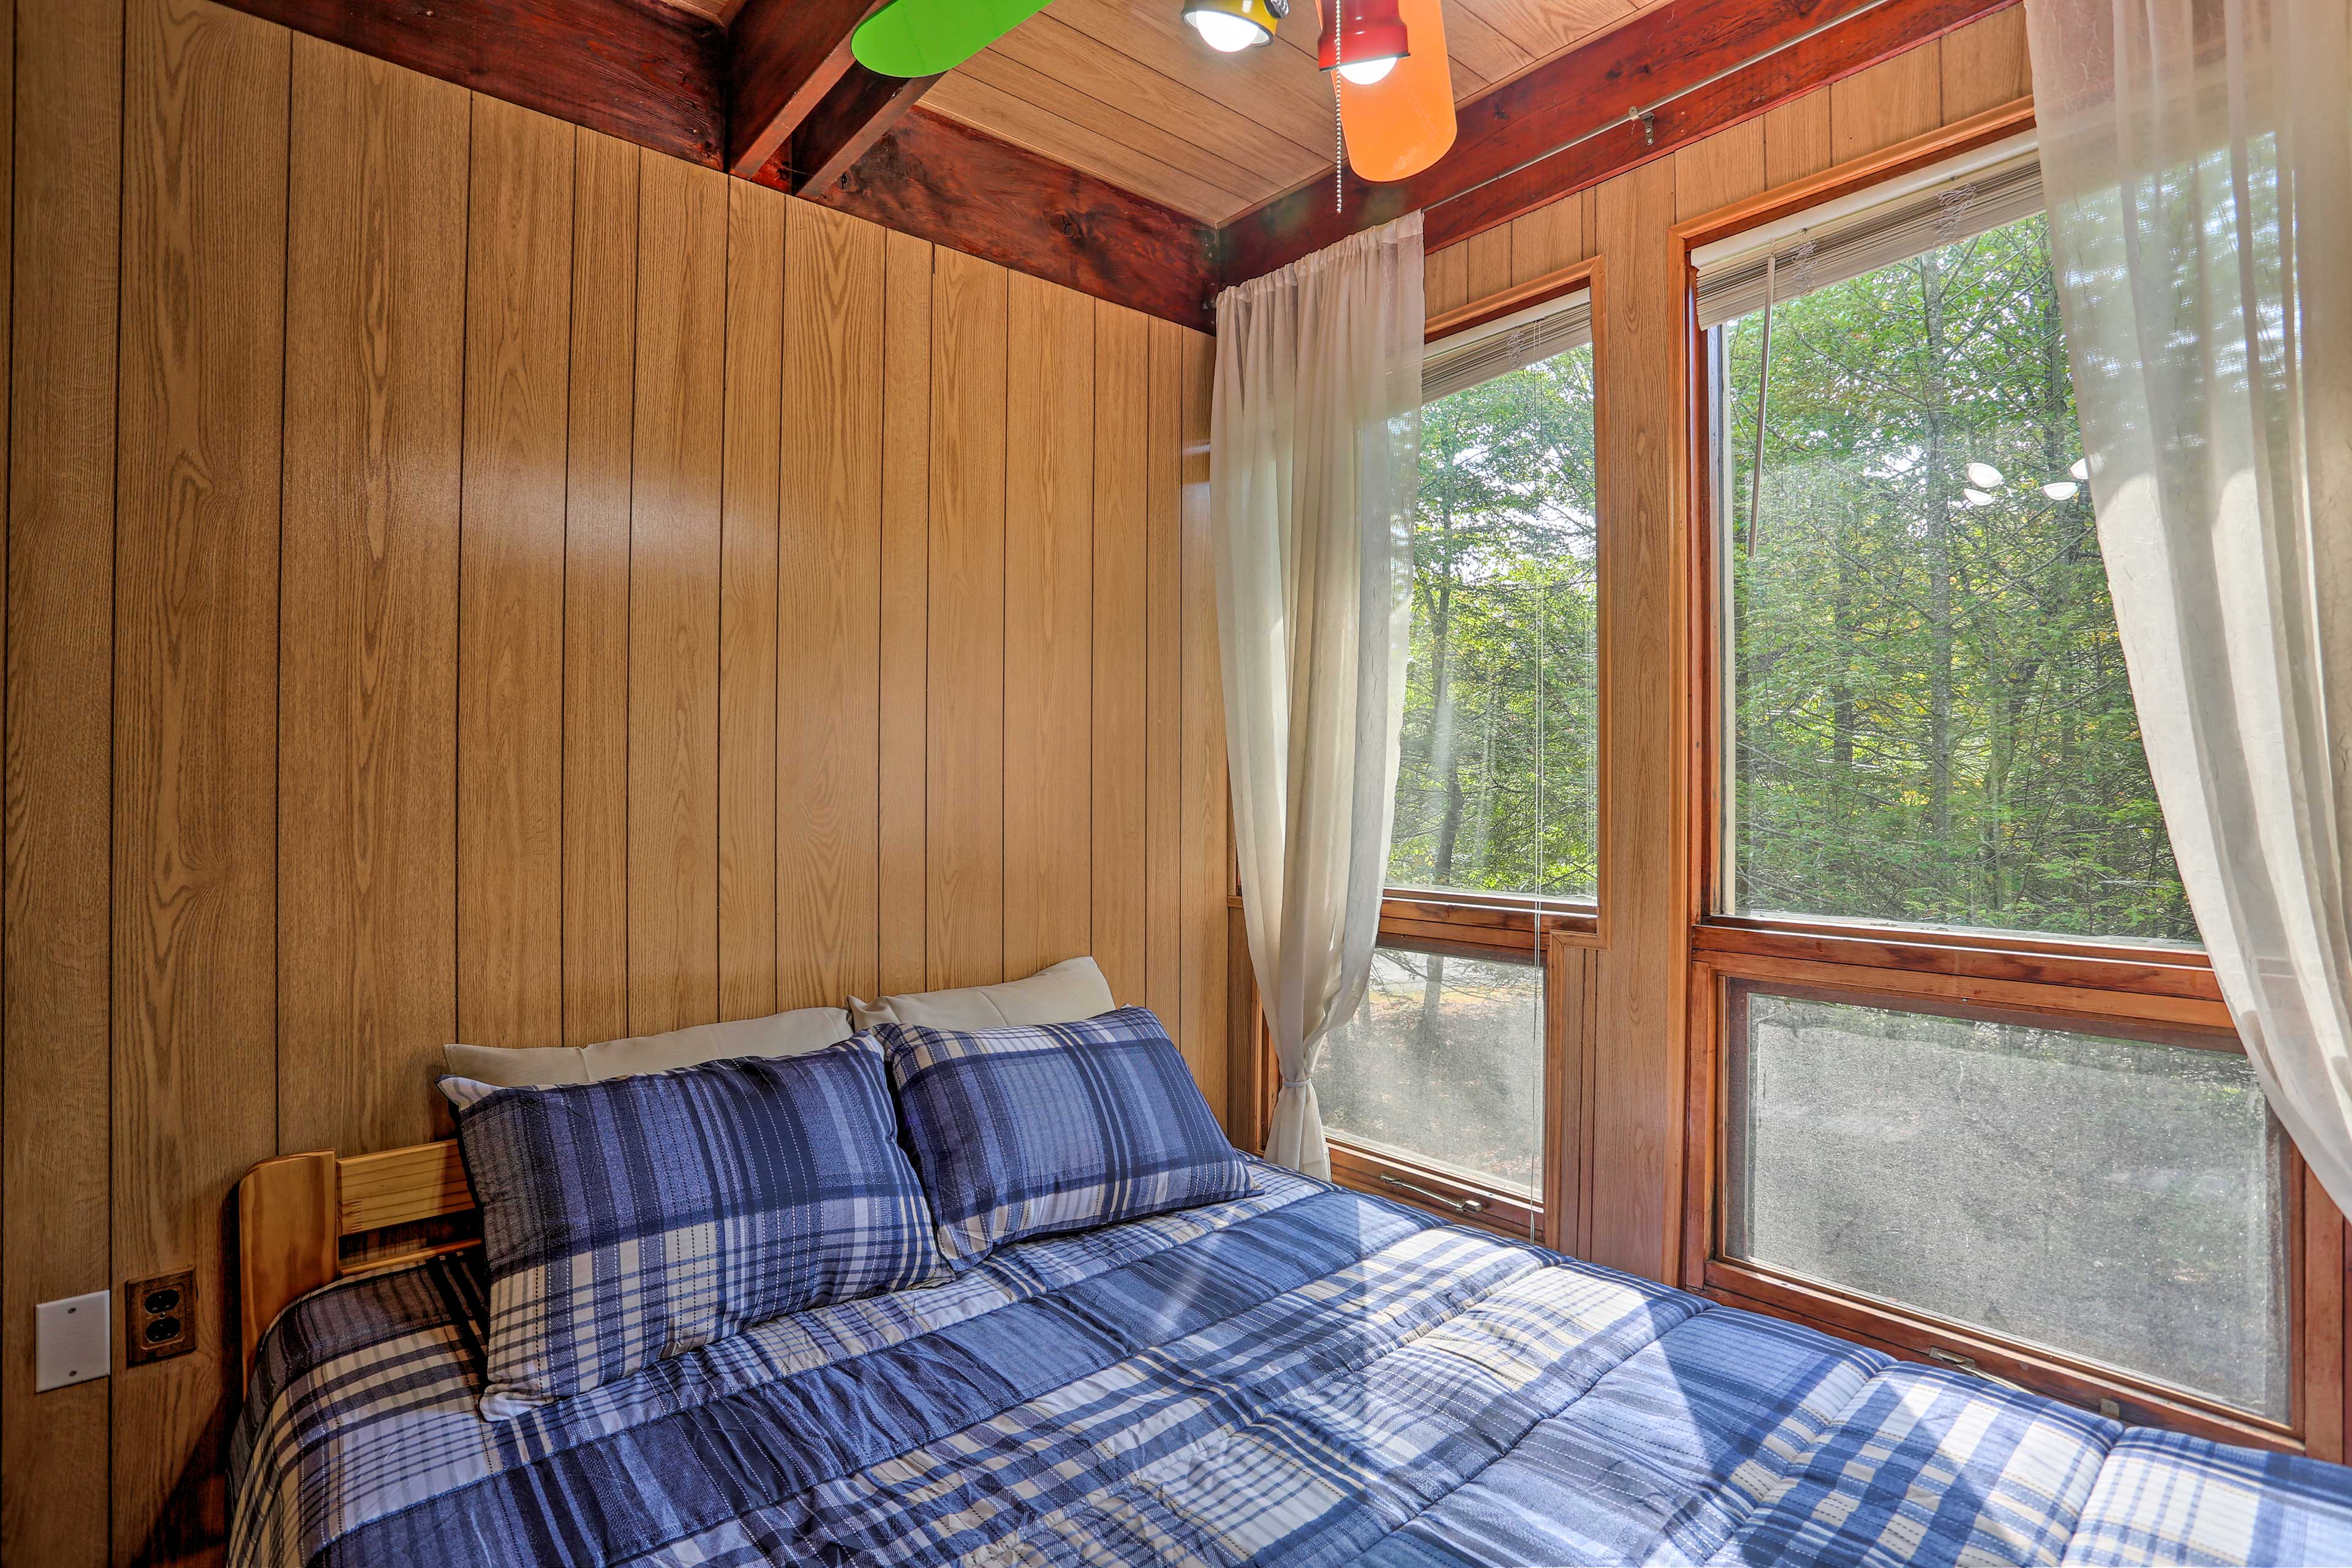 Sleep like a baby in this cozy, cabin-inspired bedroom.